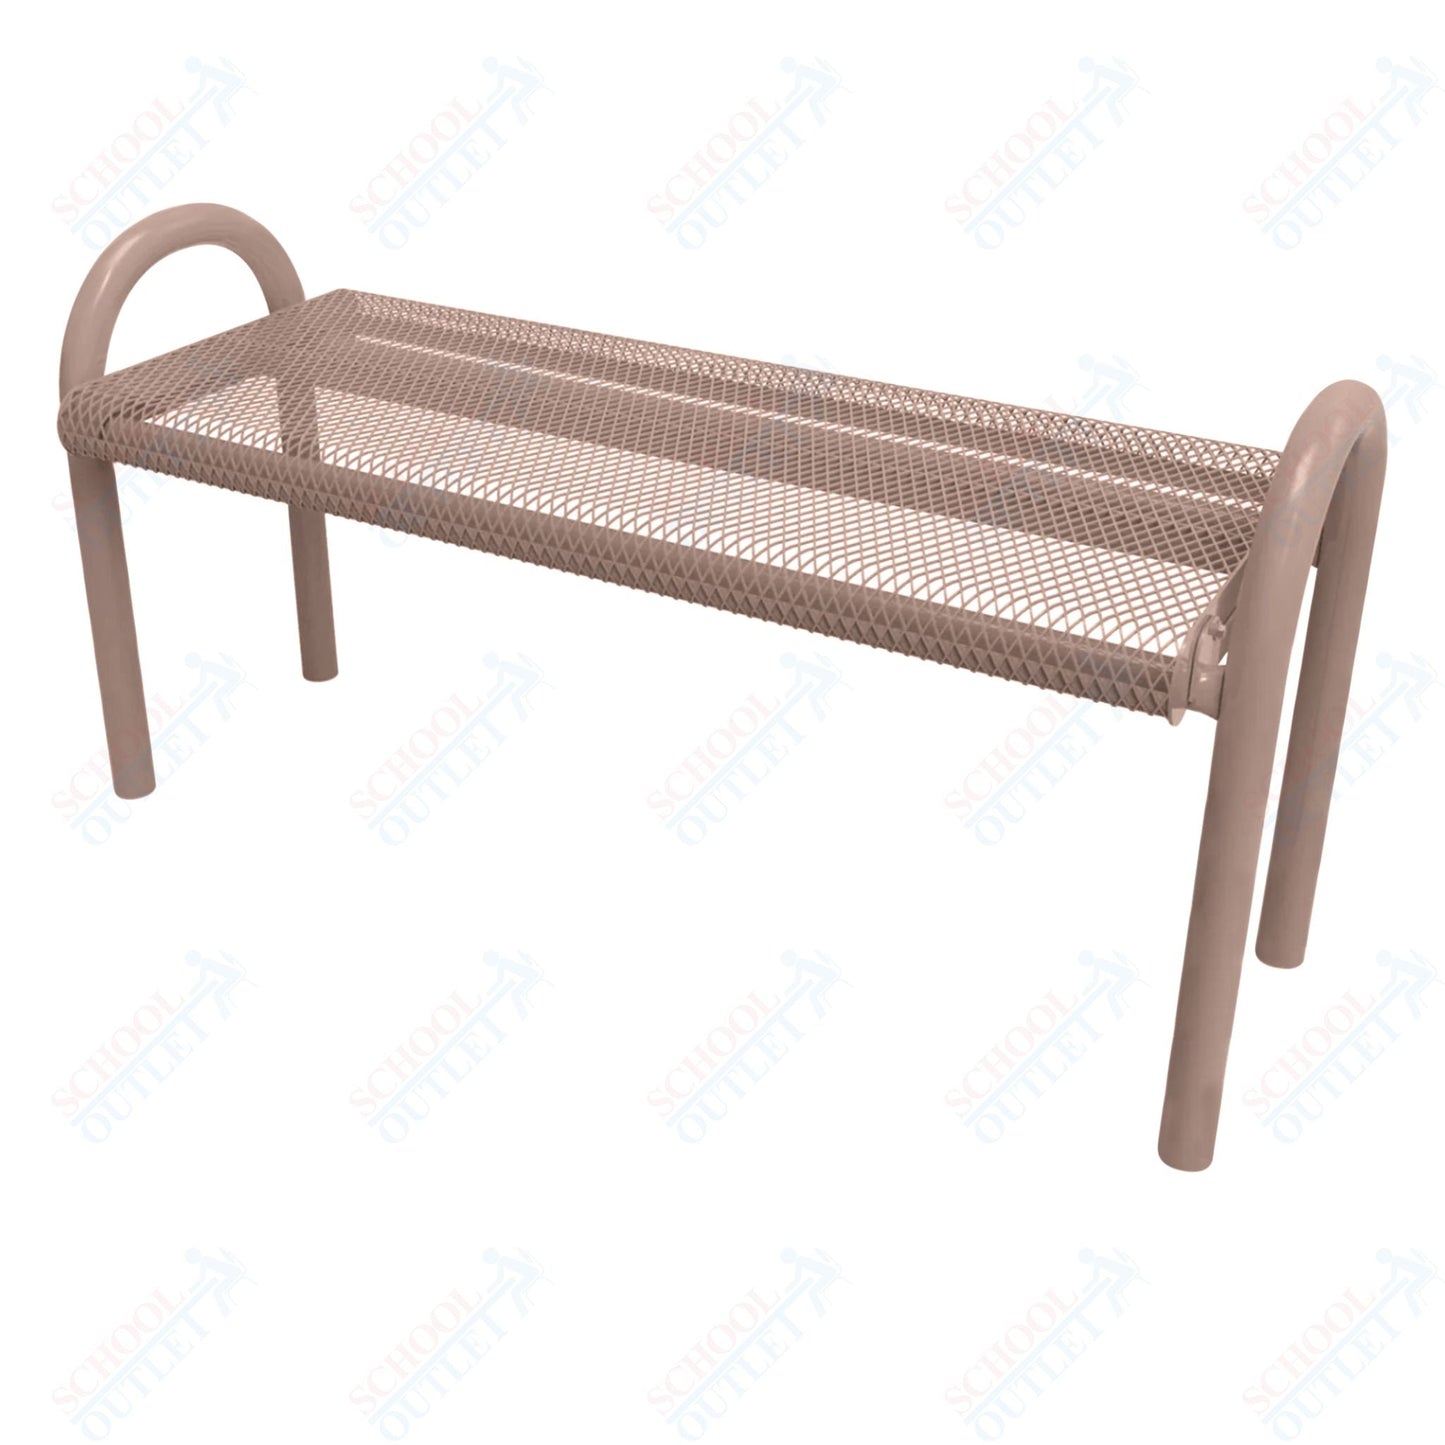 MyTcoat - Outdoor Bench without Back - Inground Mount 6' L (MYT - BMD06 - 59) - SchoolOutlet